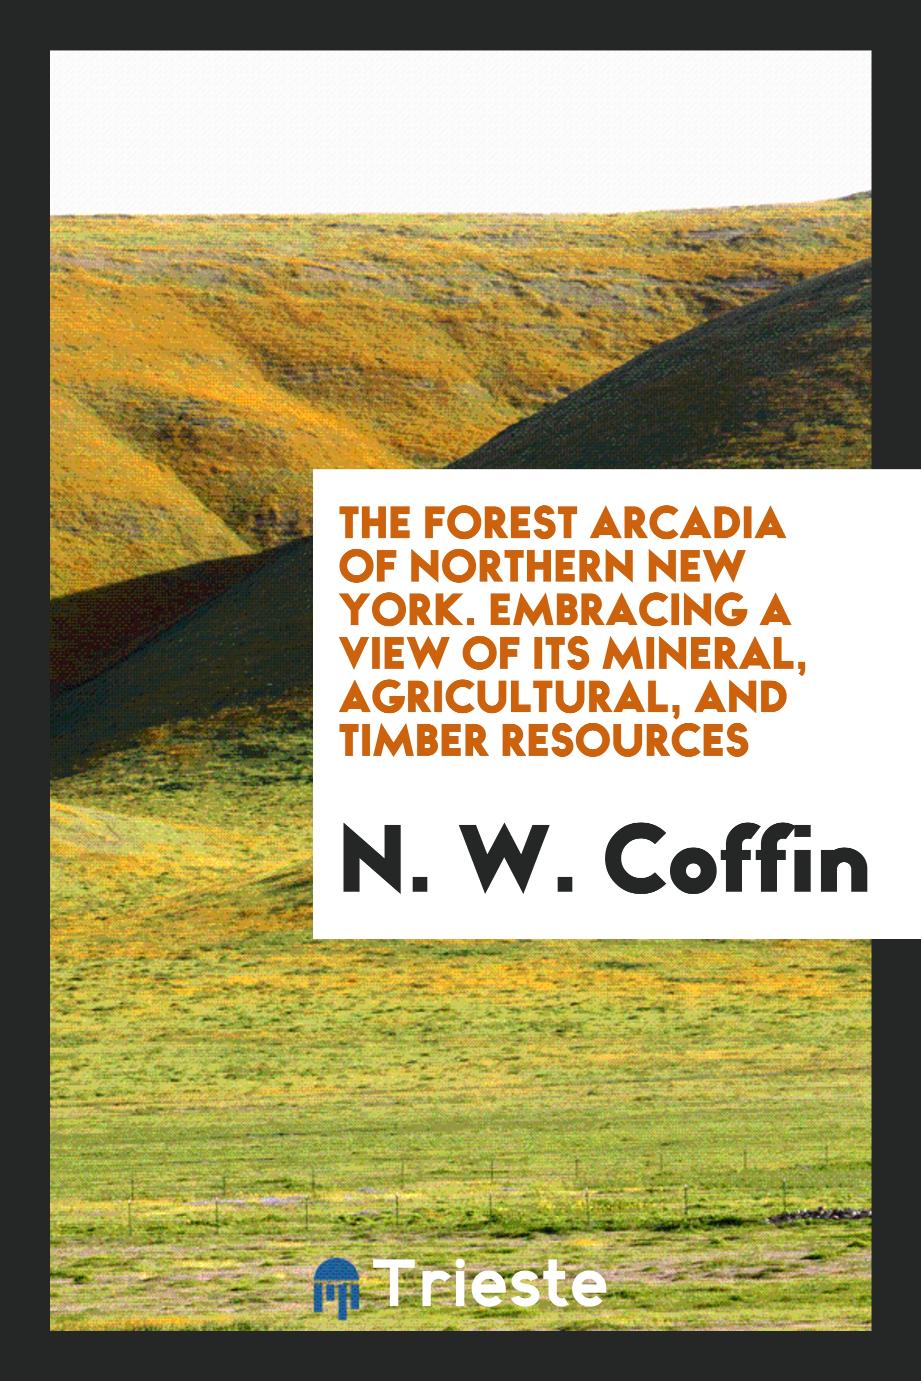 The Forest Arcadia of Northern New York. Embracing a View of Its Mineral, Agricultural, and Timber Resources